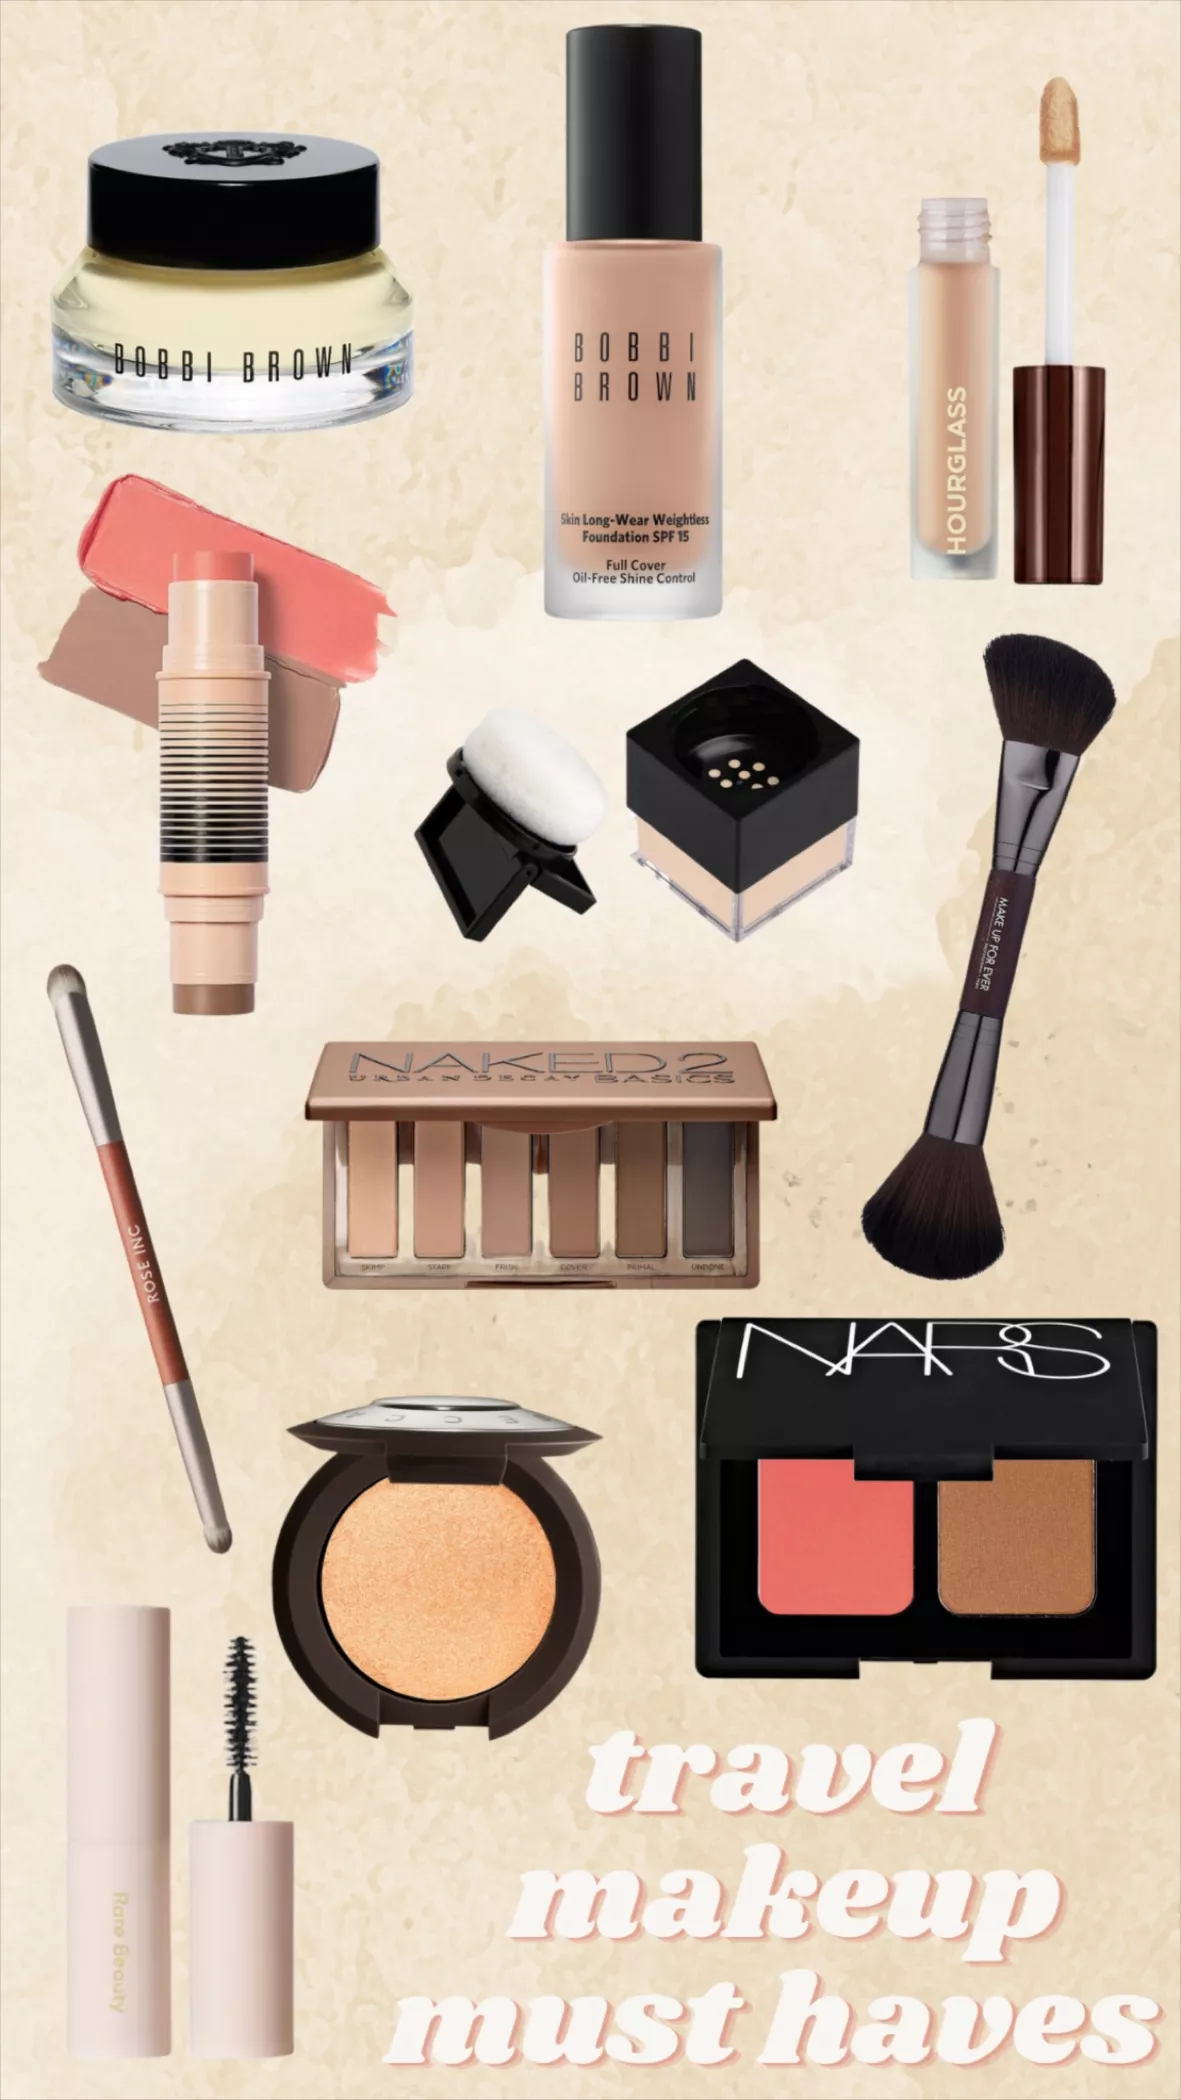 Mini Makeup Products: Where to Find Them and What to Buy